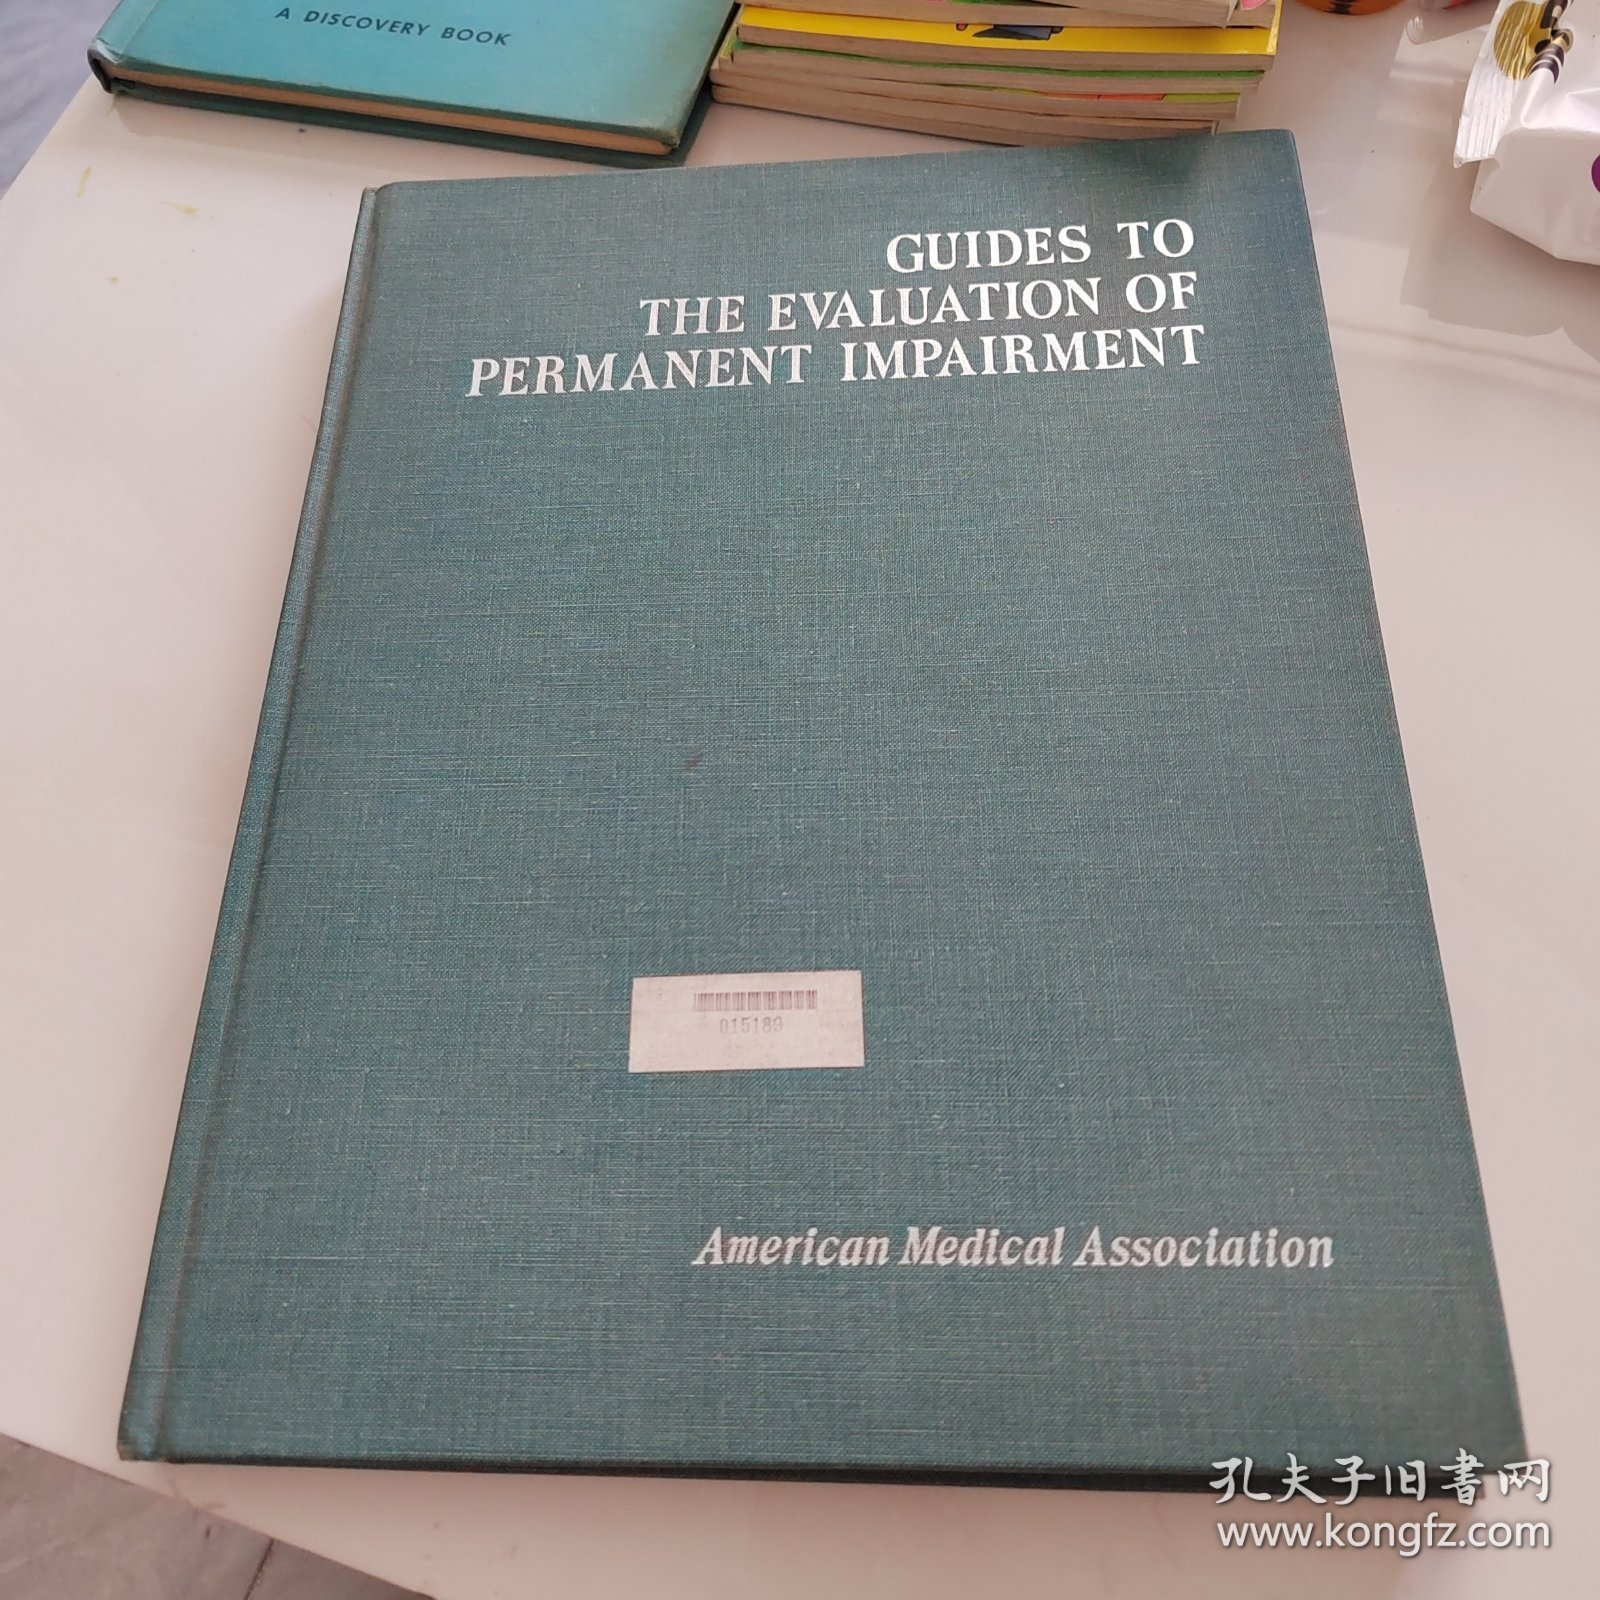 GUIDES TO THE EVALUATION OF PERMANENT IMPAIEMENT